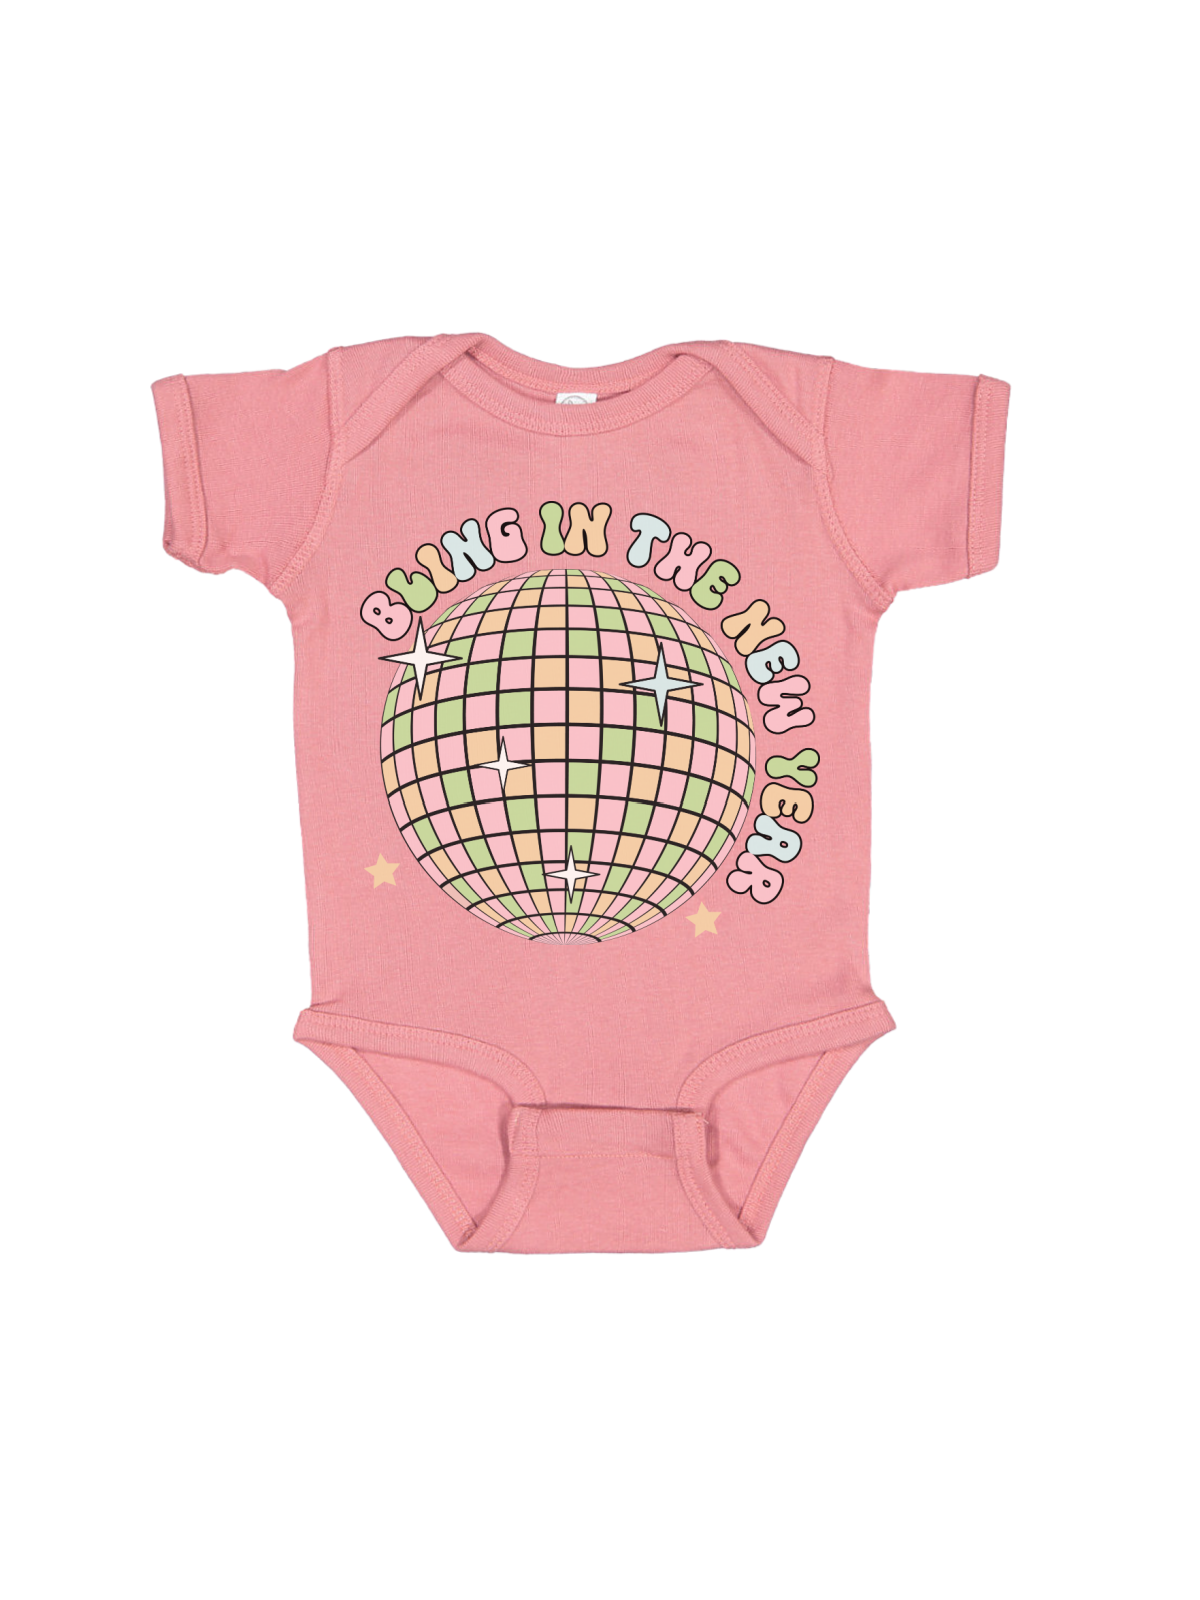 Bling in the New Year Baby Bodysuit in Mauve